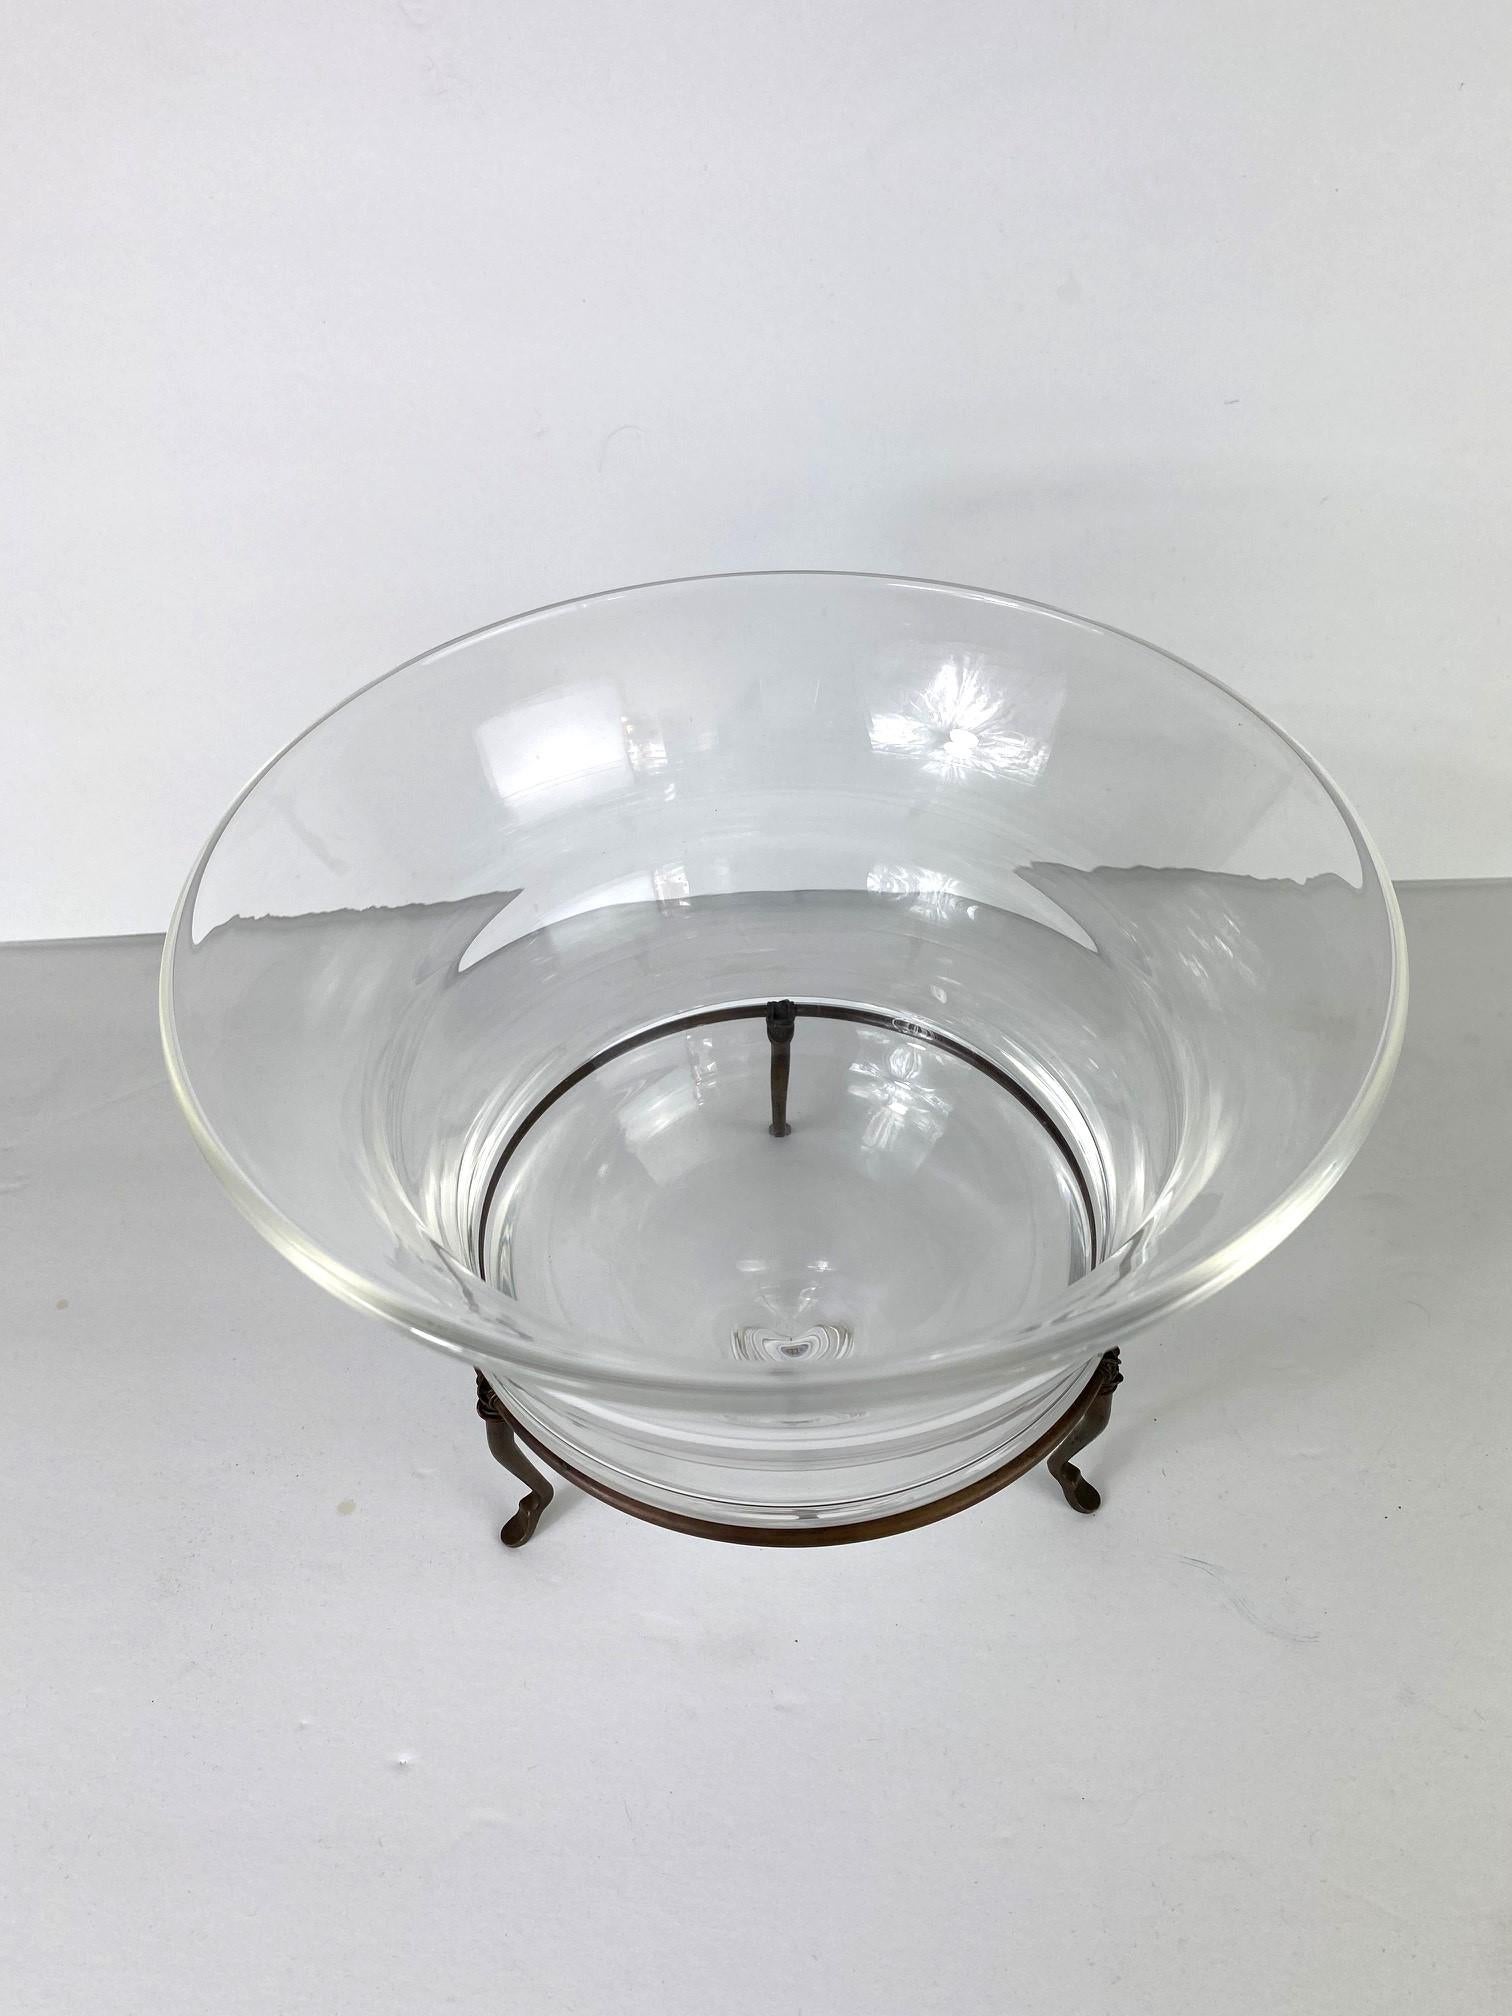 Hand-blown round-shaped bowl with a metal stand.